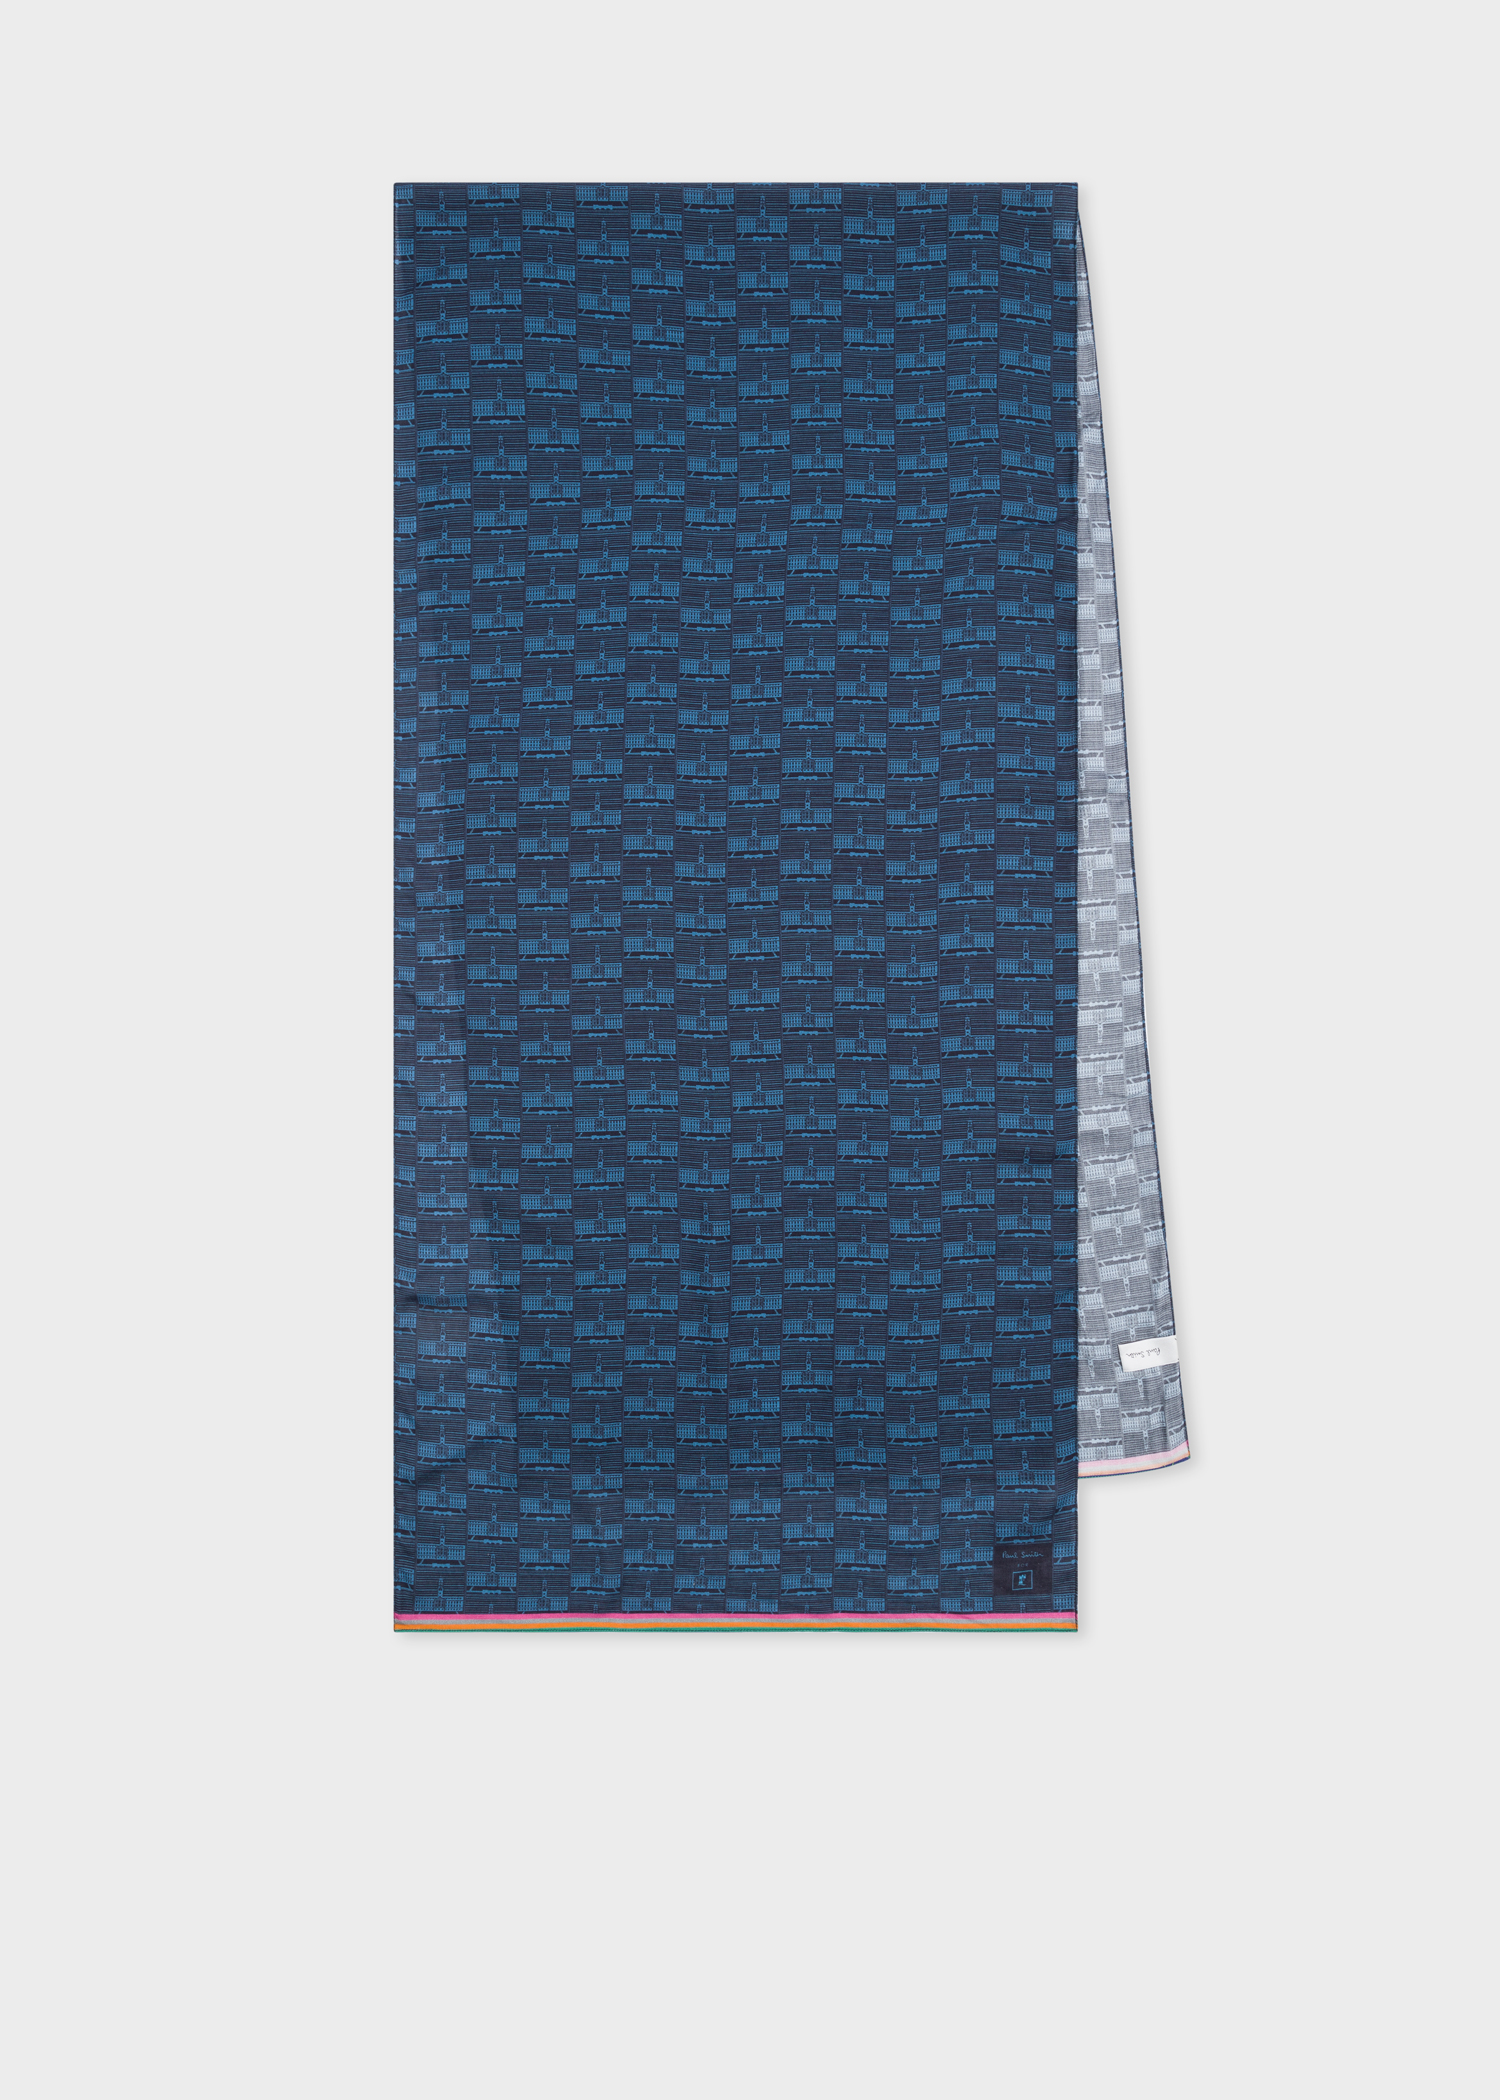 Flat view - Paul Smith For University Of Nottingham - Navy 'Trent Building' Scarf 